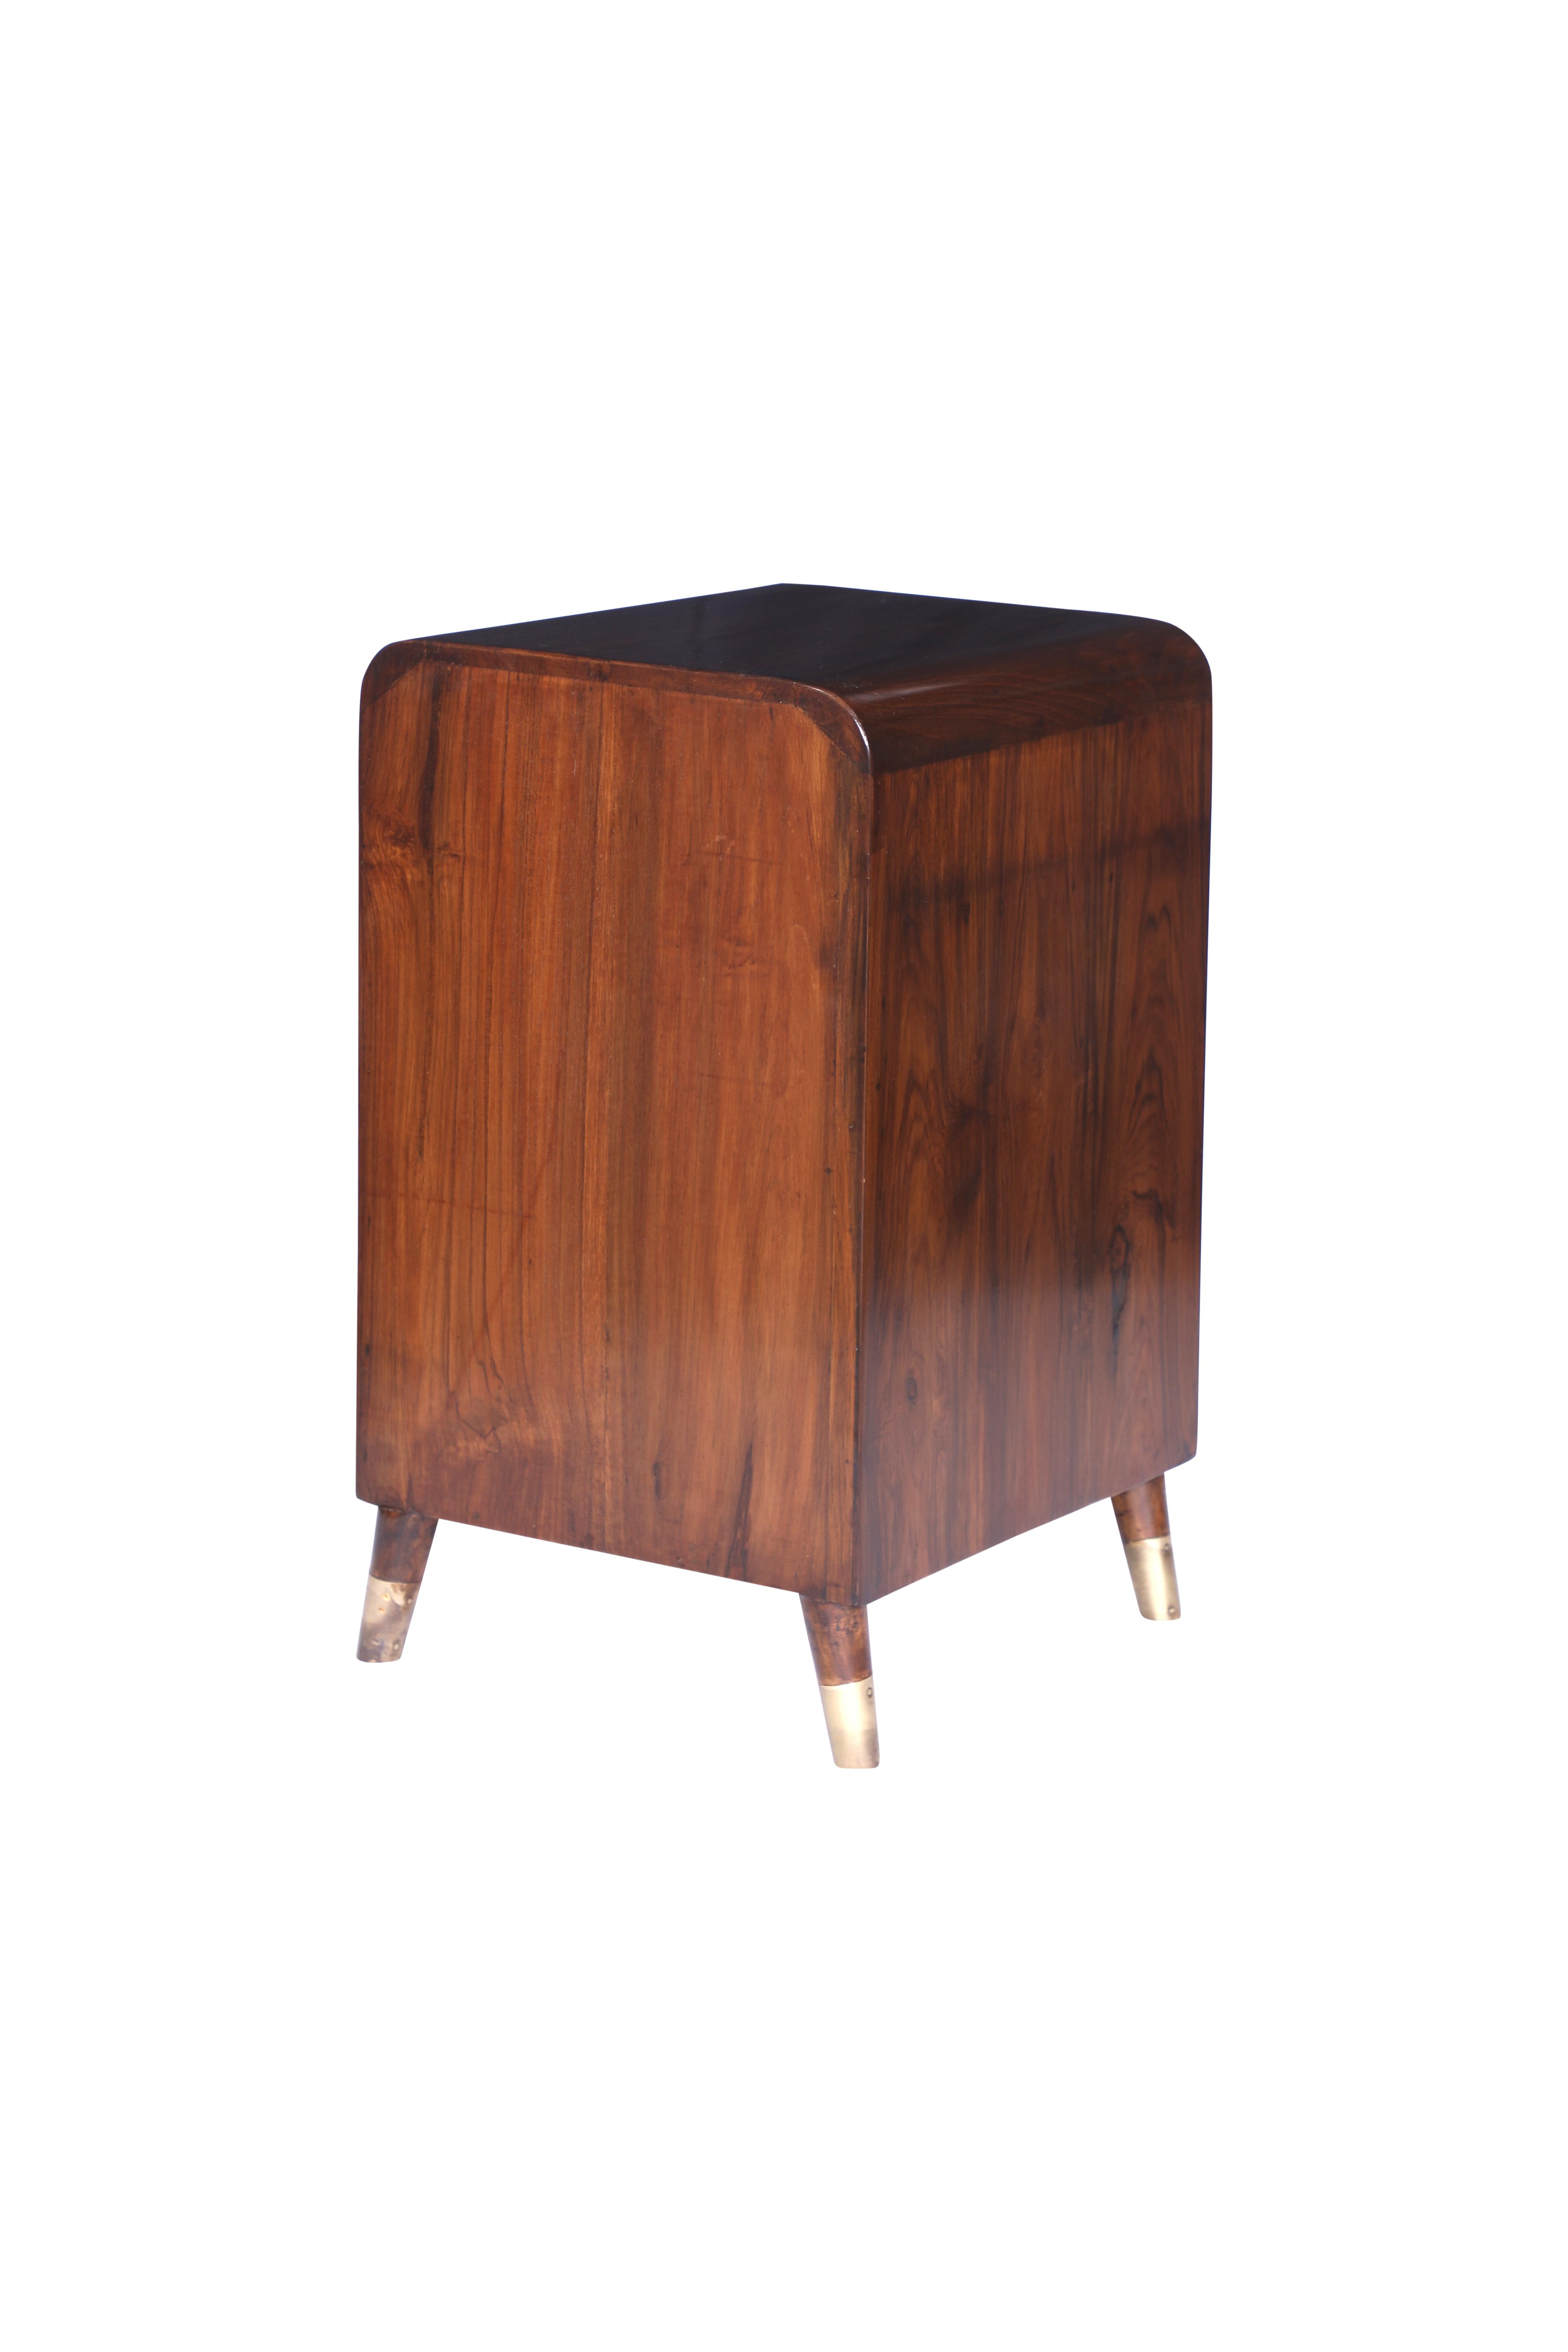 Pair of Teak and Rosewood End or Side Tables, Mid-Century Modern 2